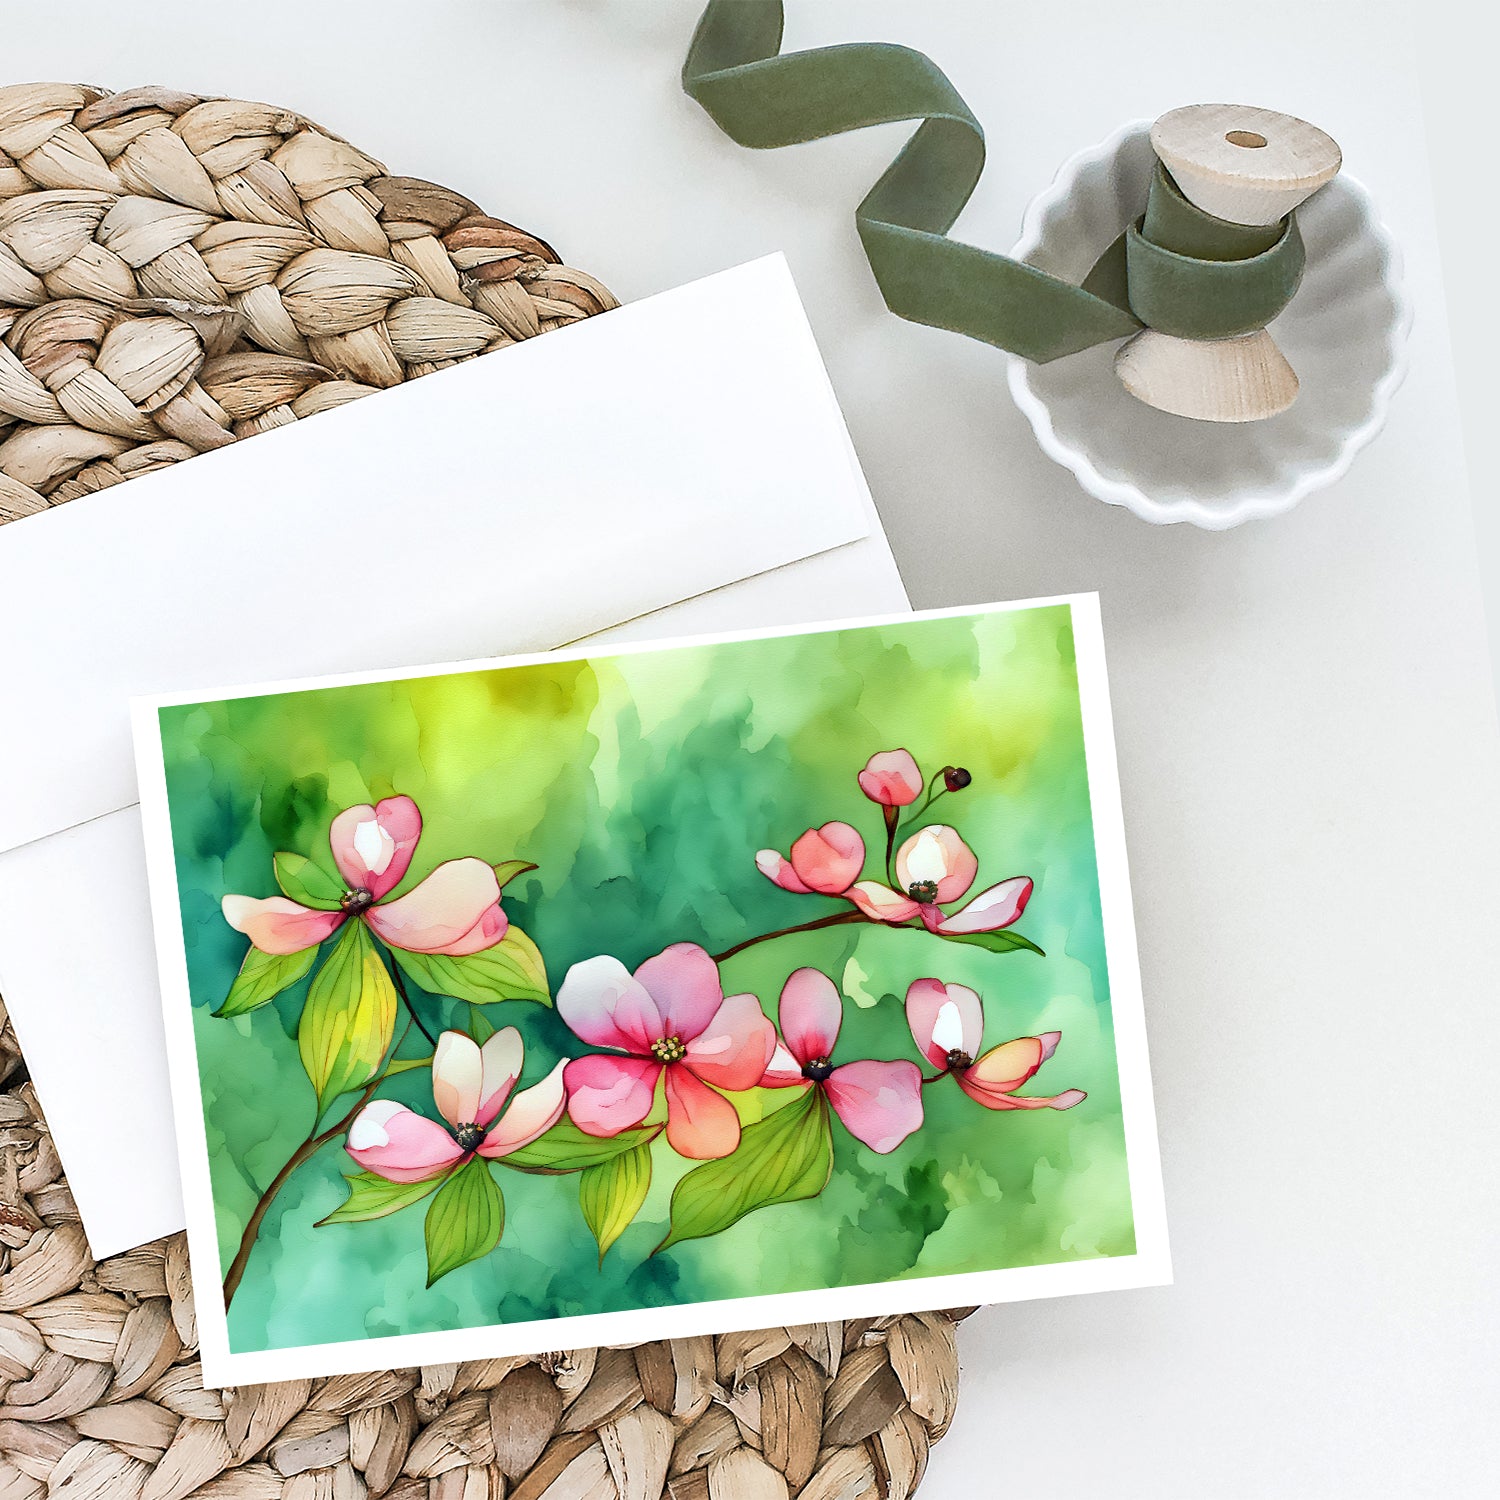 Virginia American Dogwood in Watercolor Greeting Cards and Envelopes Pack of 8